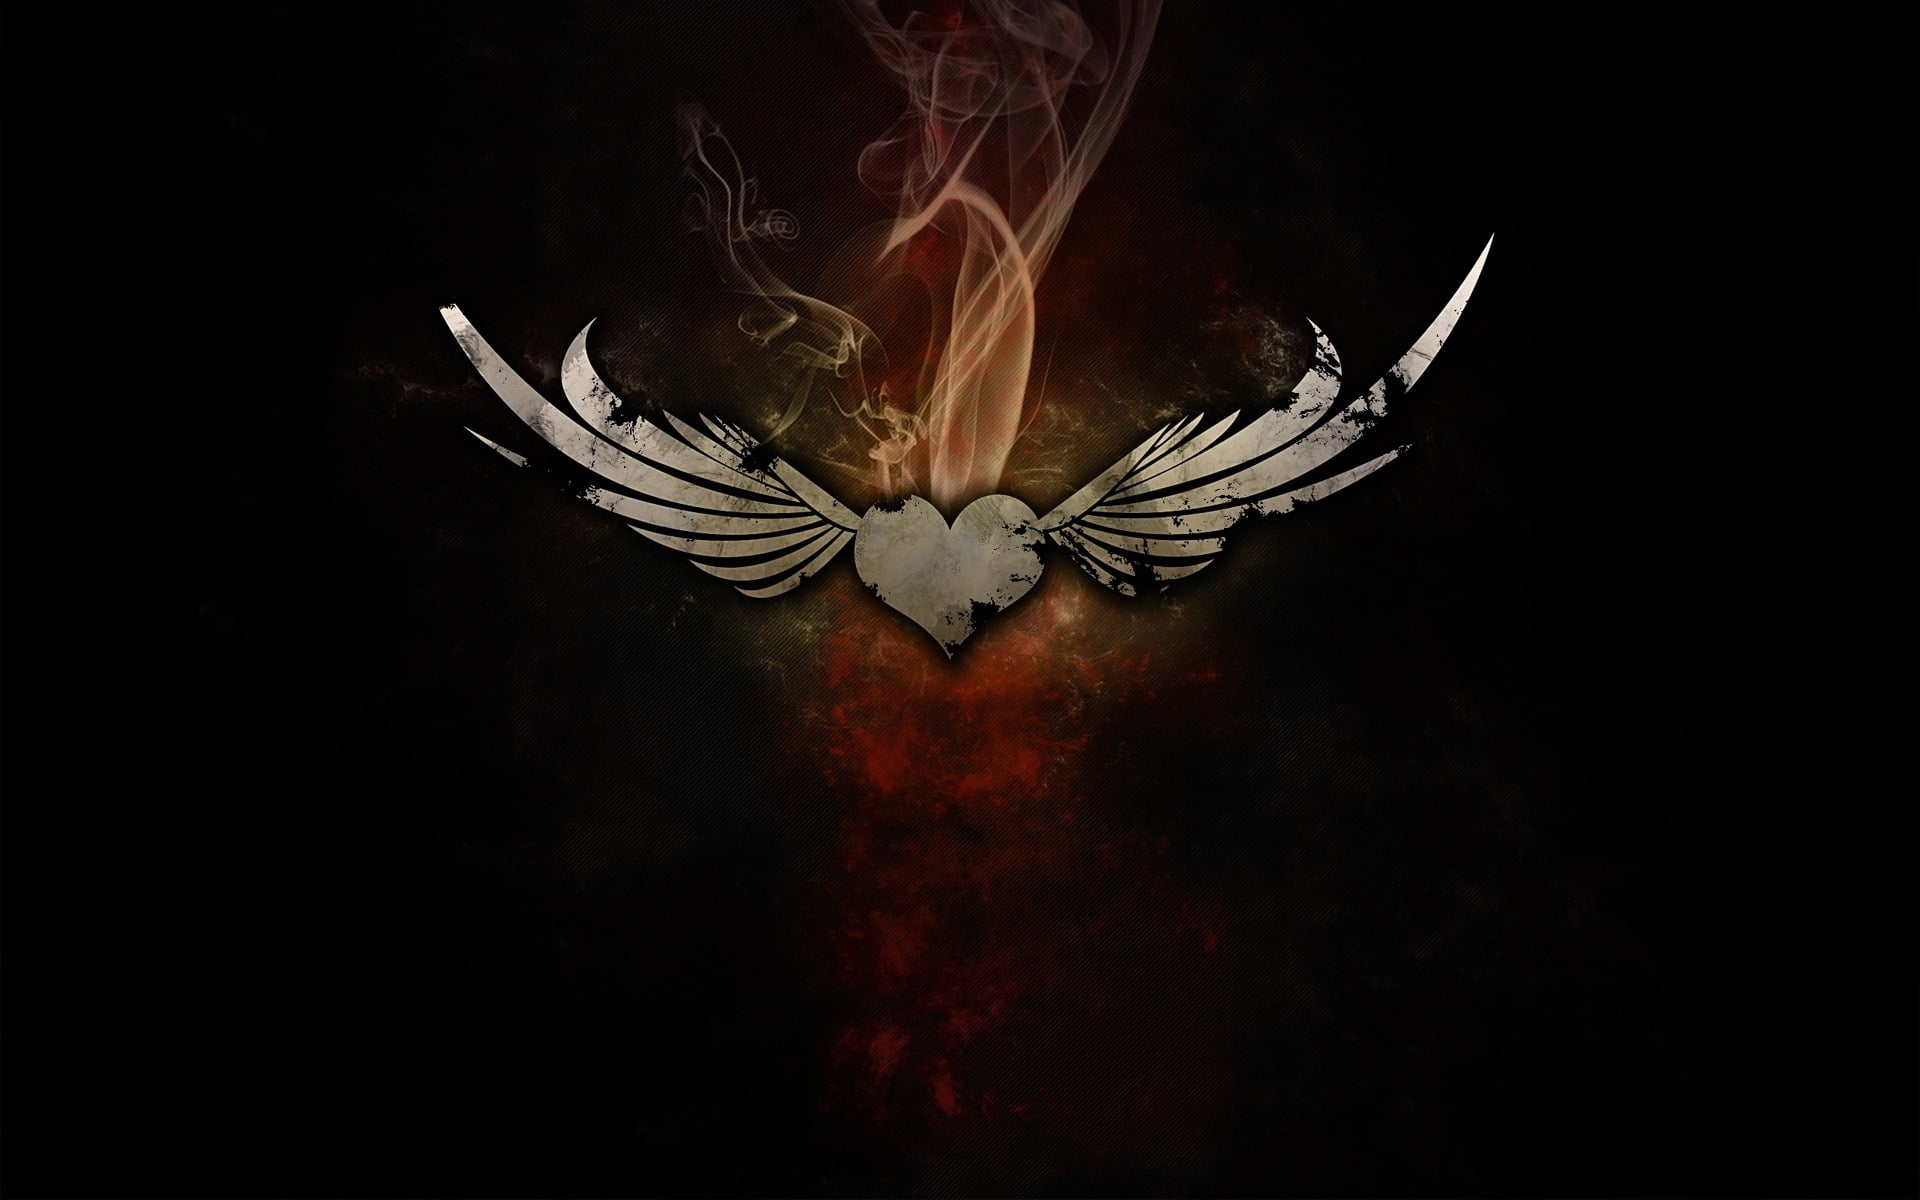 heart with wings logo